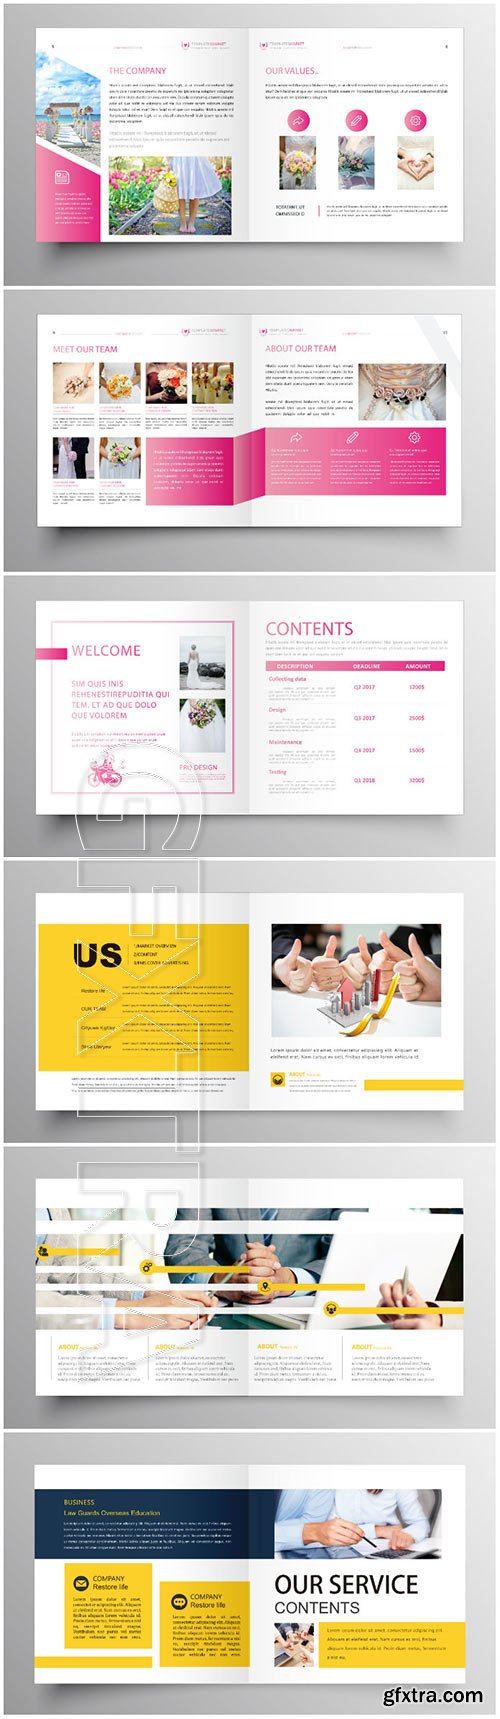 Brochure template vector layout design, corporate business annual report, magazine, flyer mockup # 205